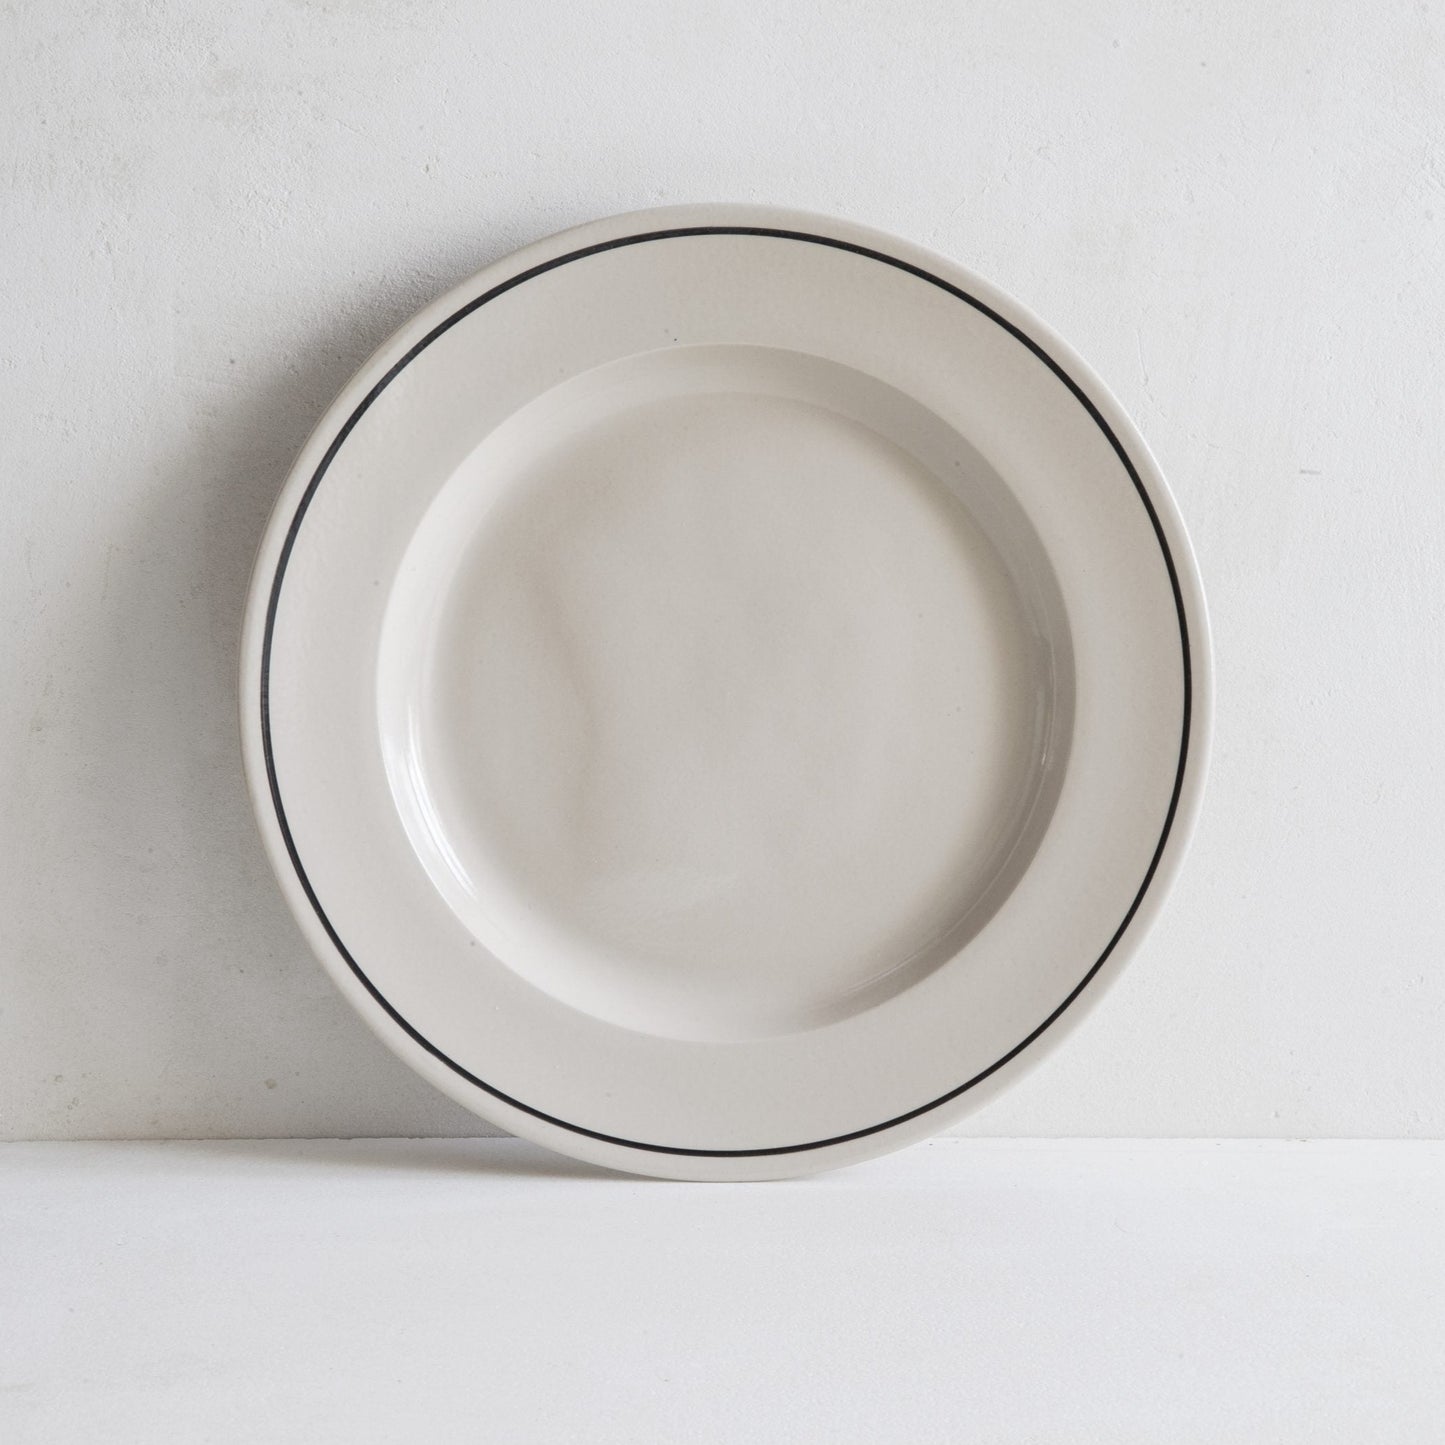 Stoneware dinner plate with black line